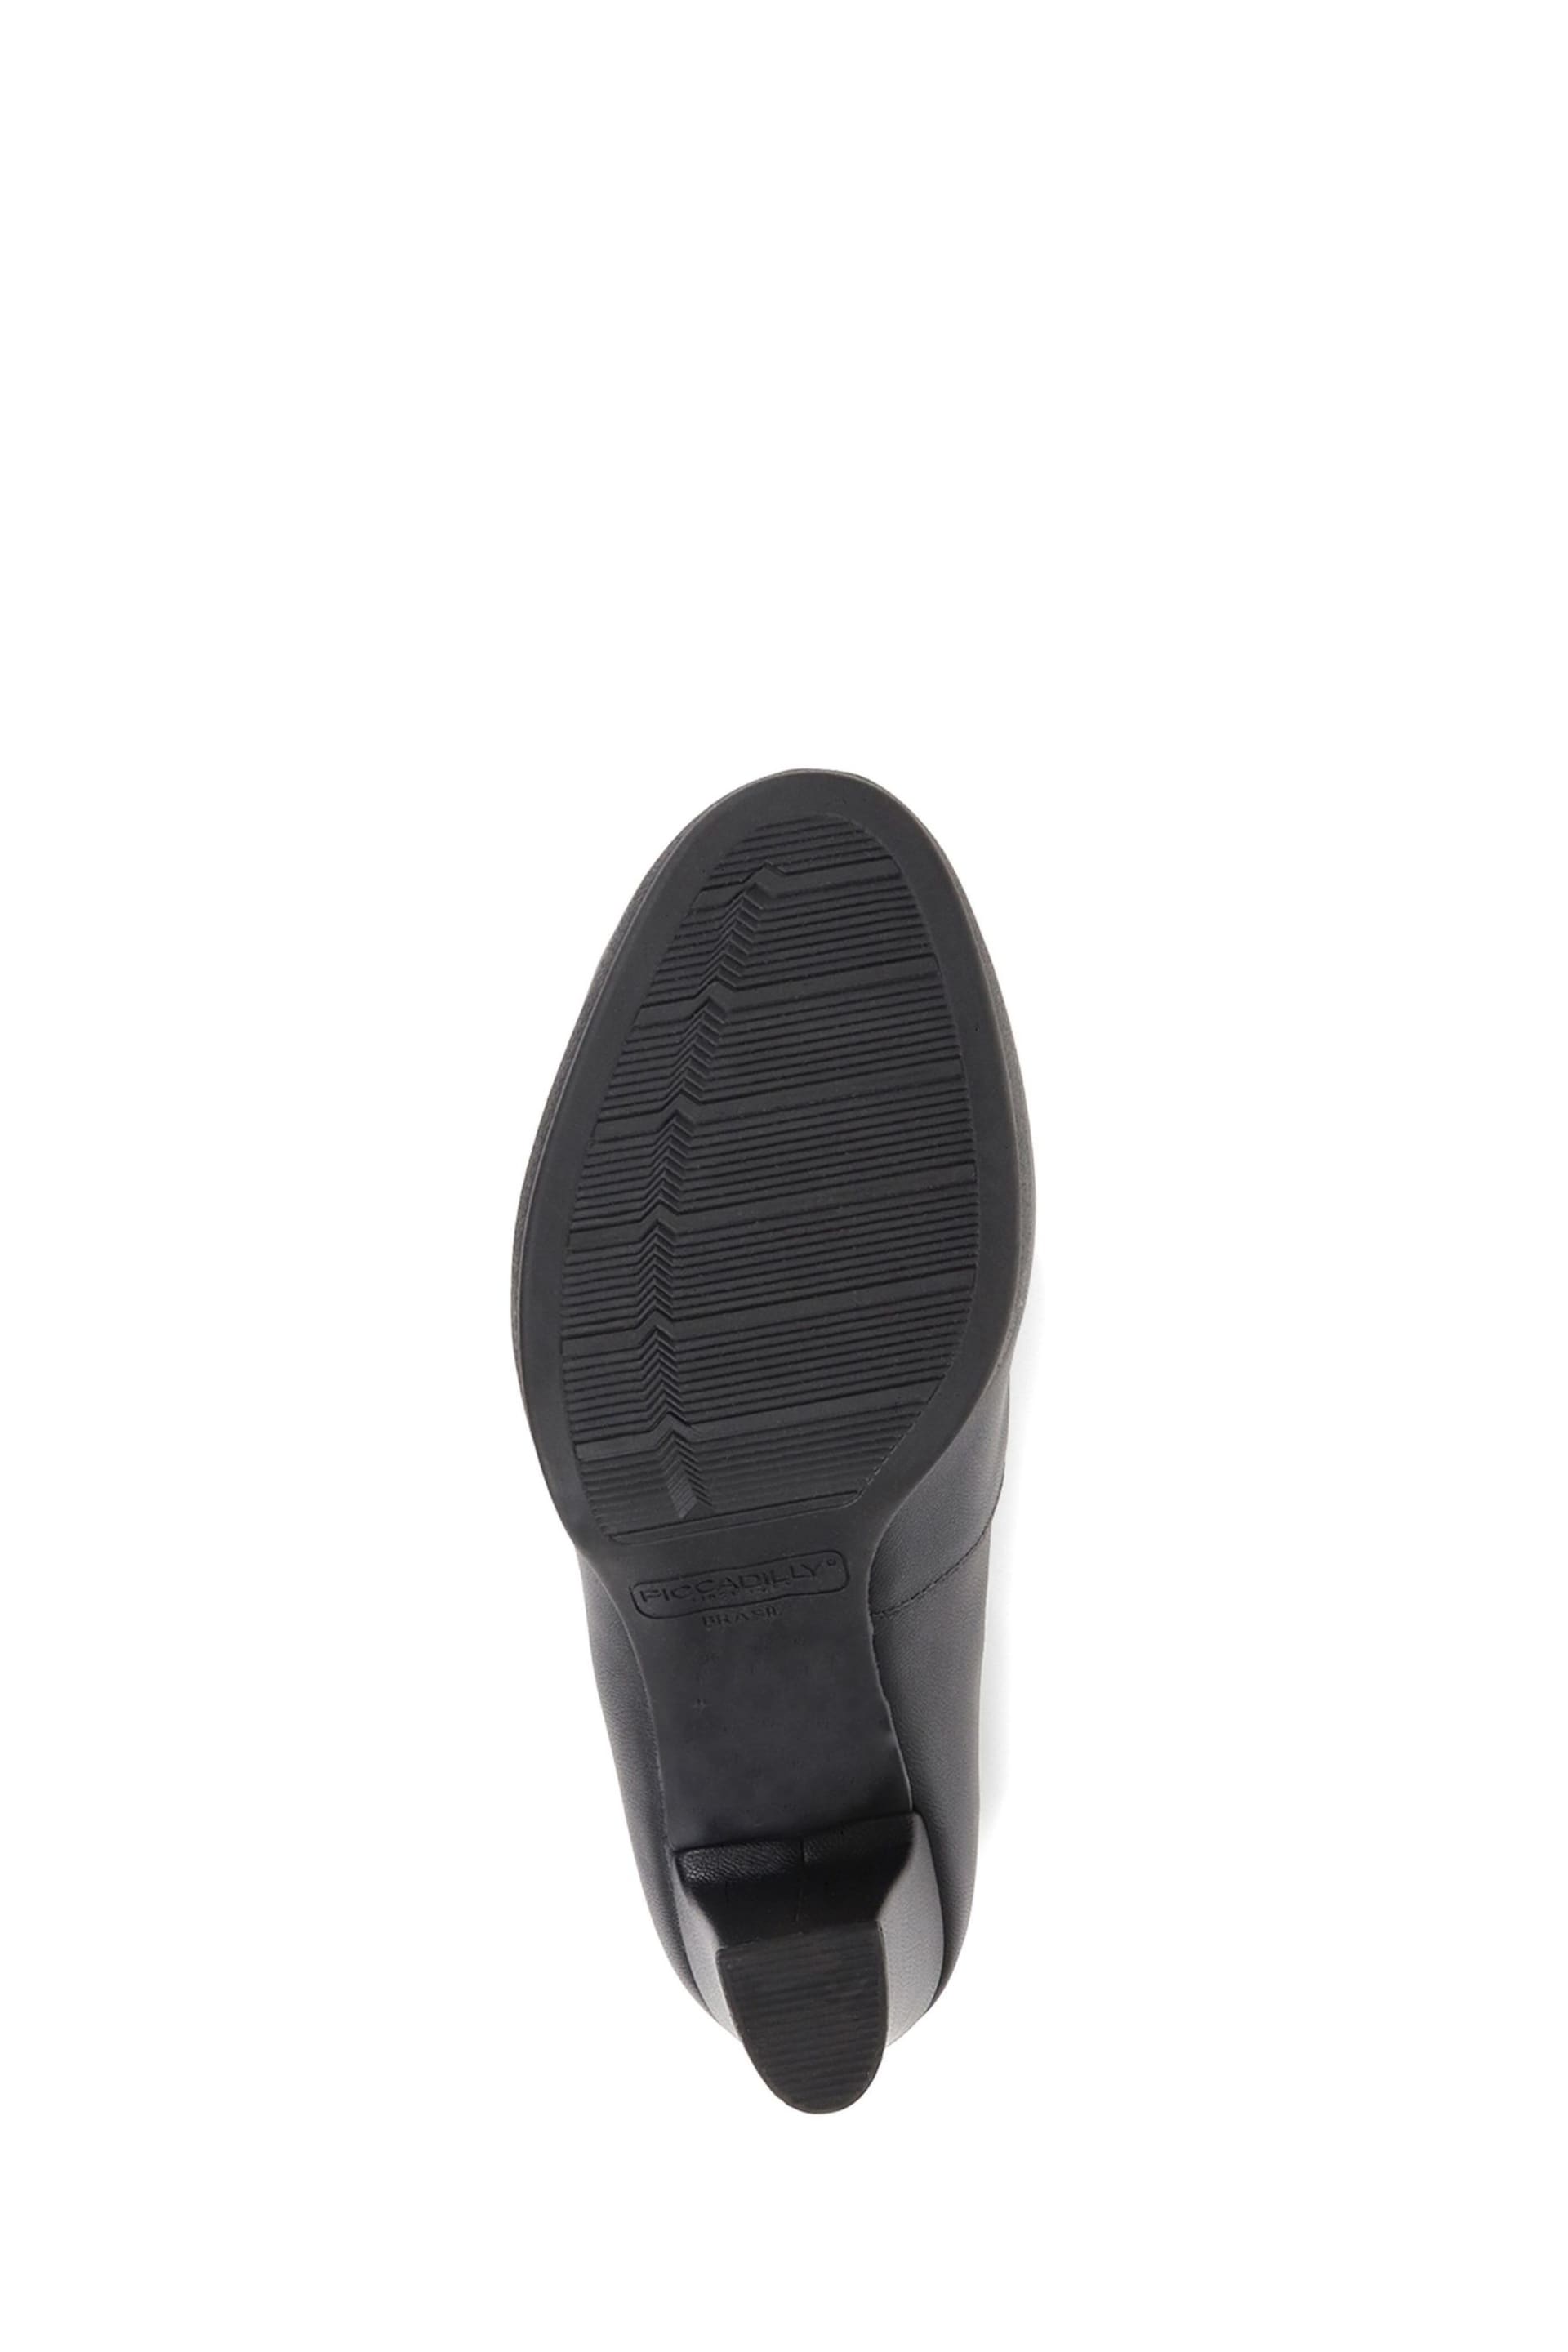 Pavers Black High Heel Court Shoes - Image 5 of 5